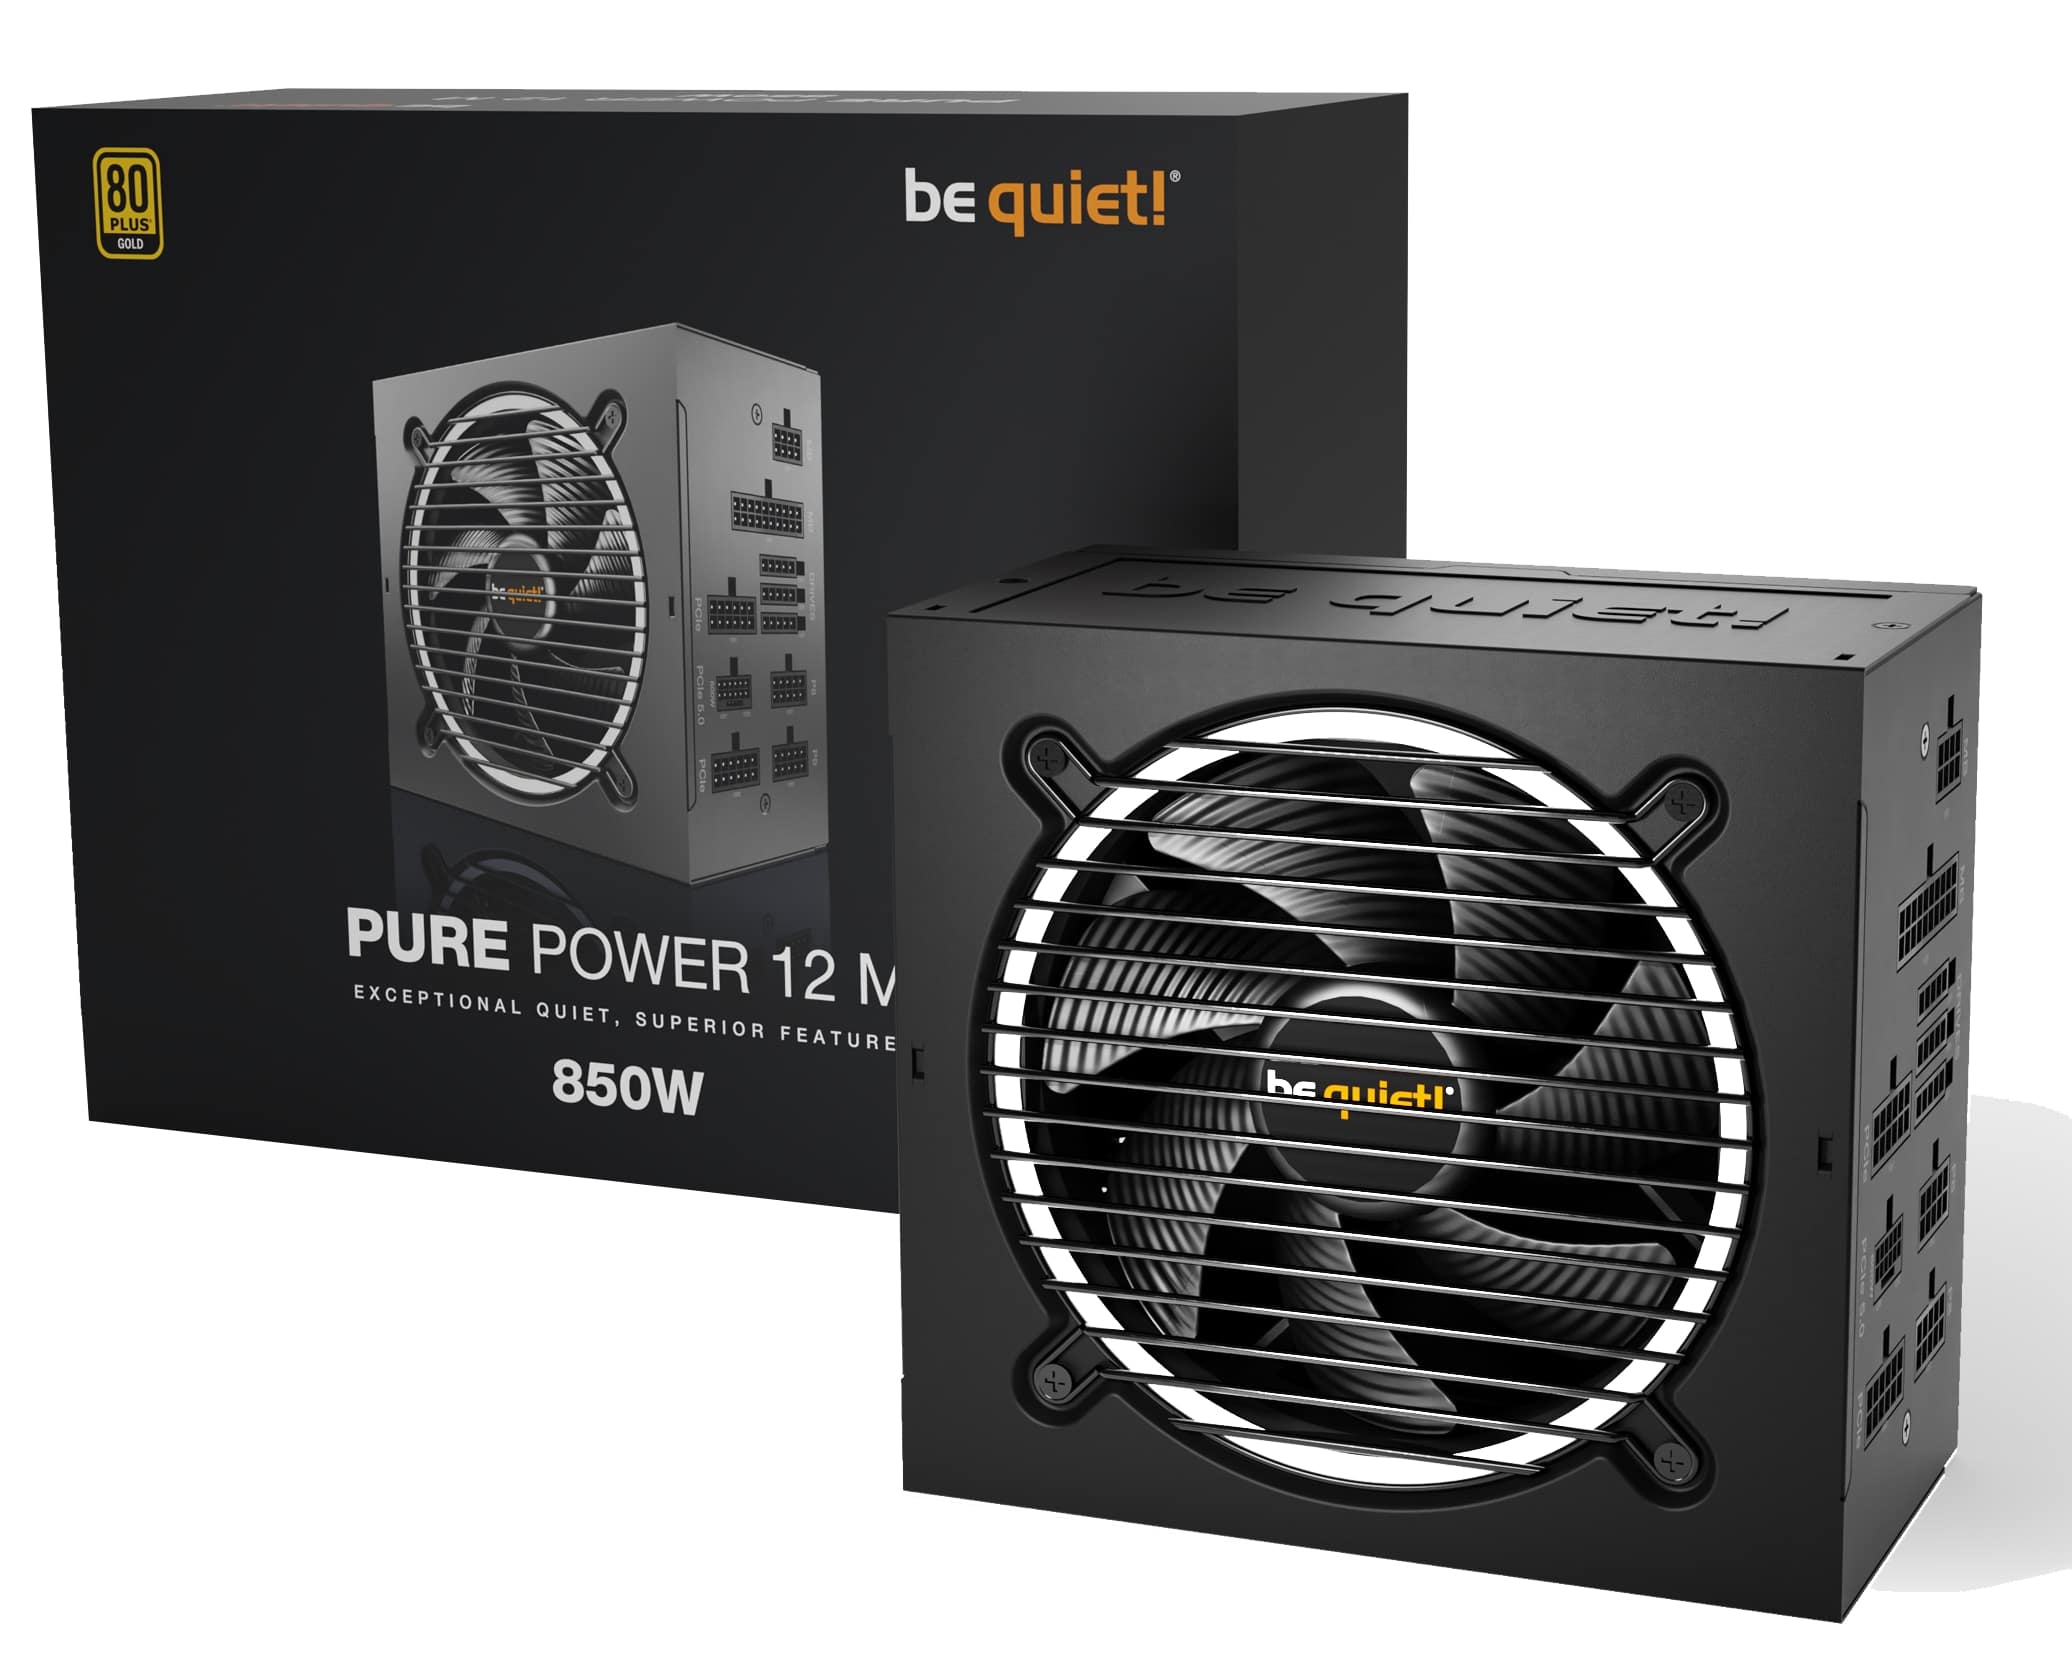 BE QUIET! Pure Power 12M 850W